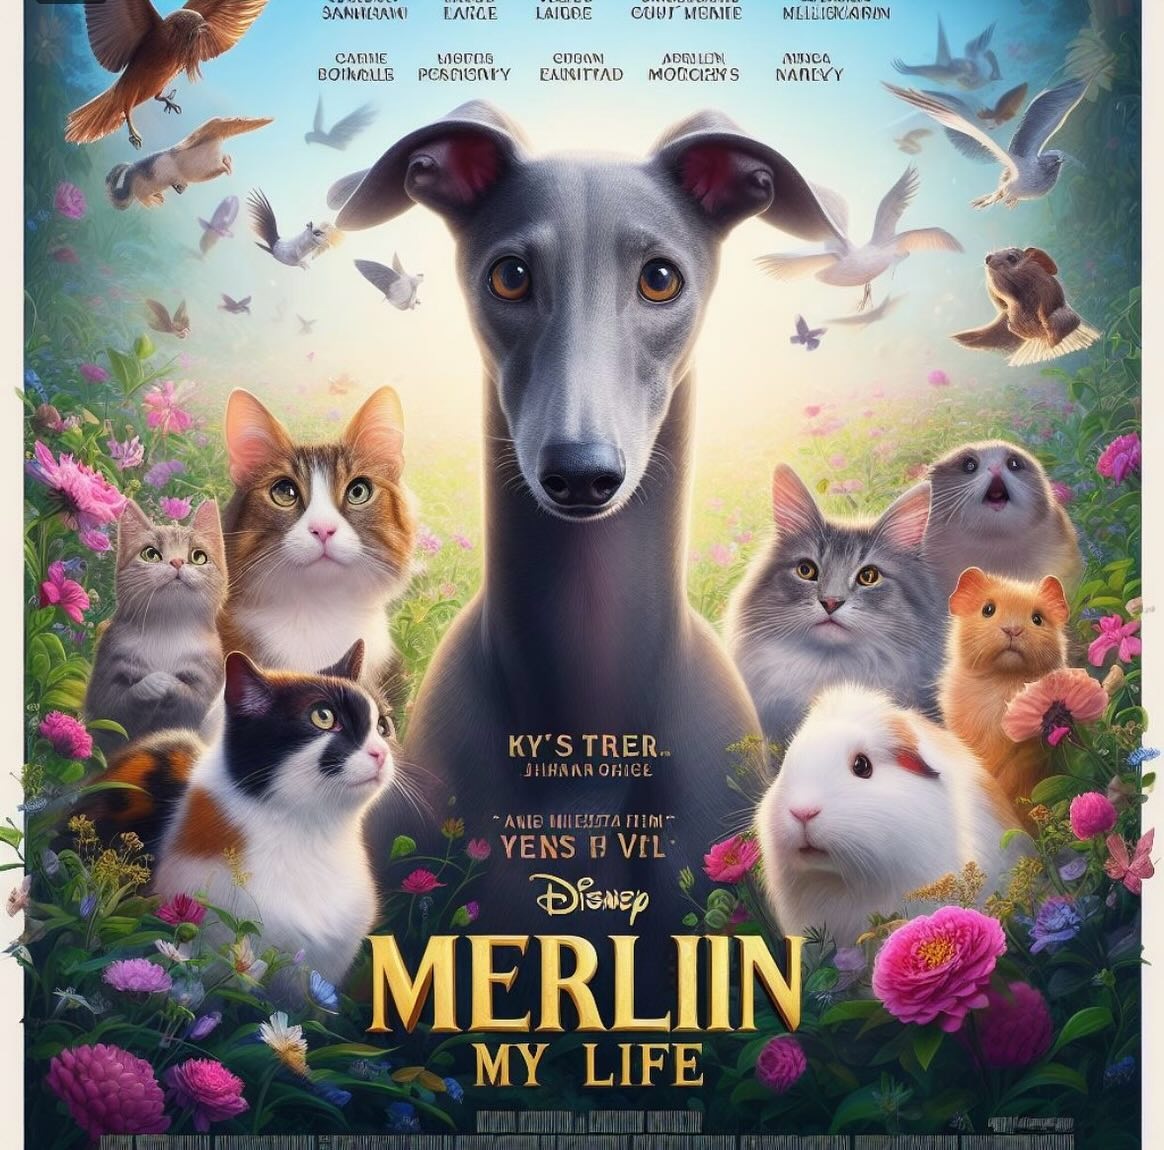 A poster for a movie called "Merlin My Life" generated by Bing AI. It looks like a Disney movie poster.